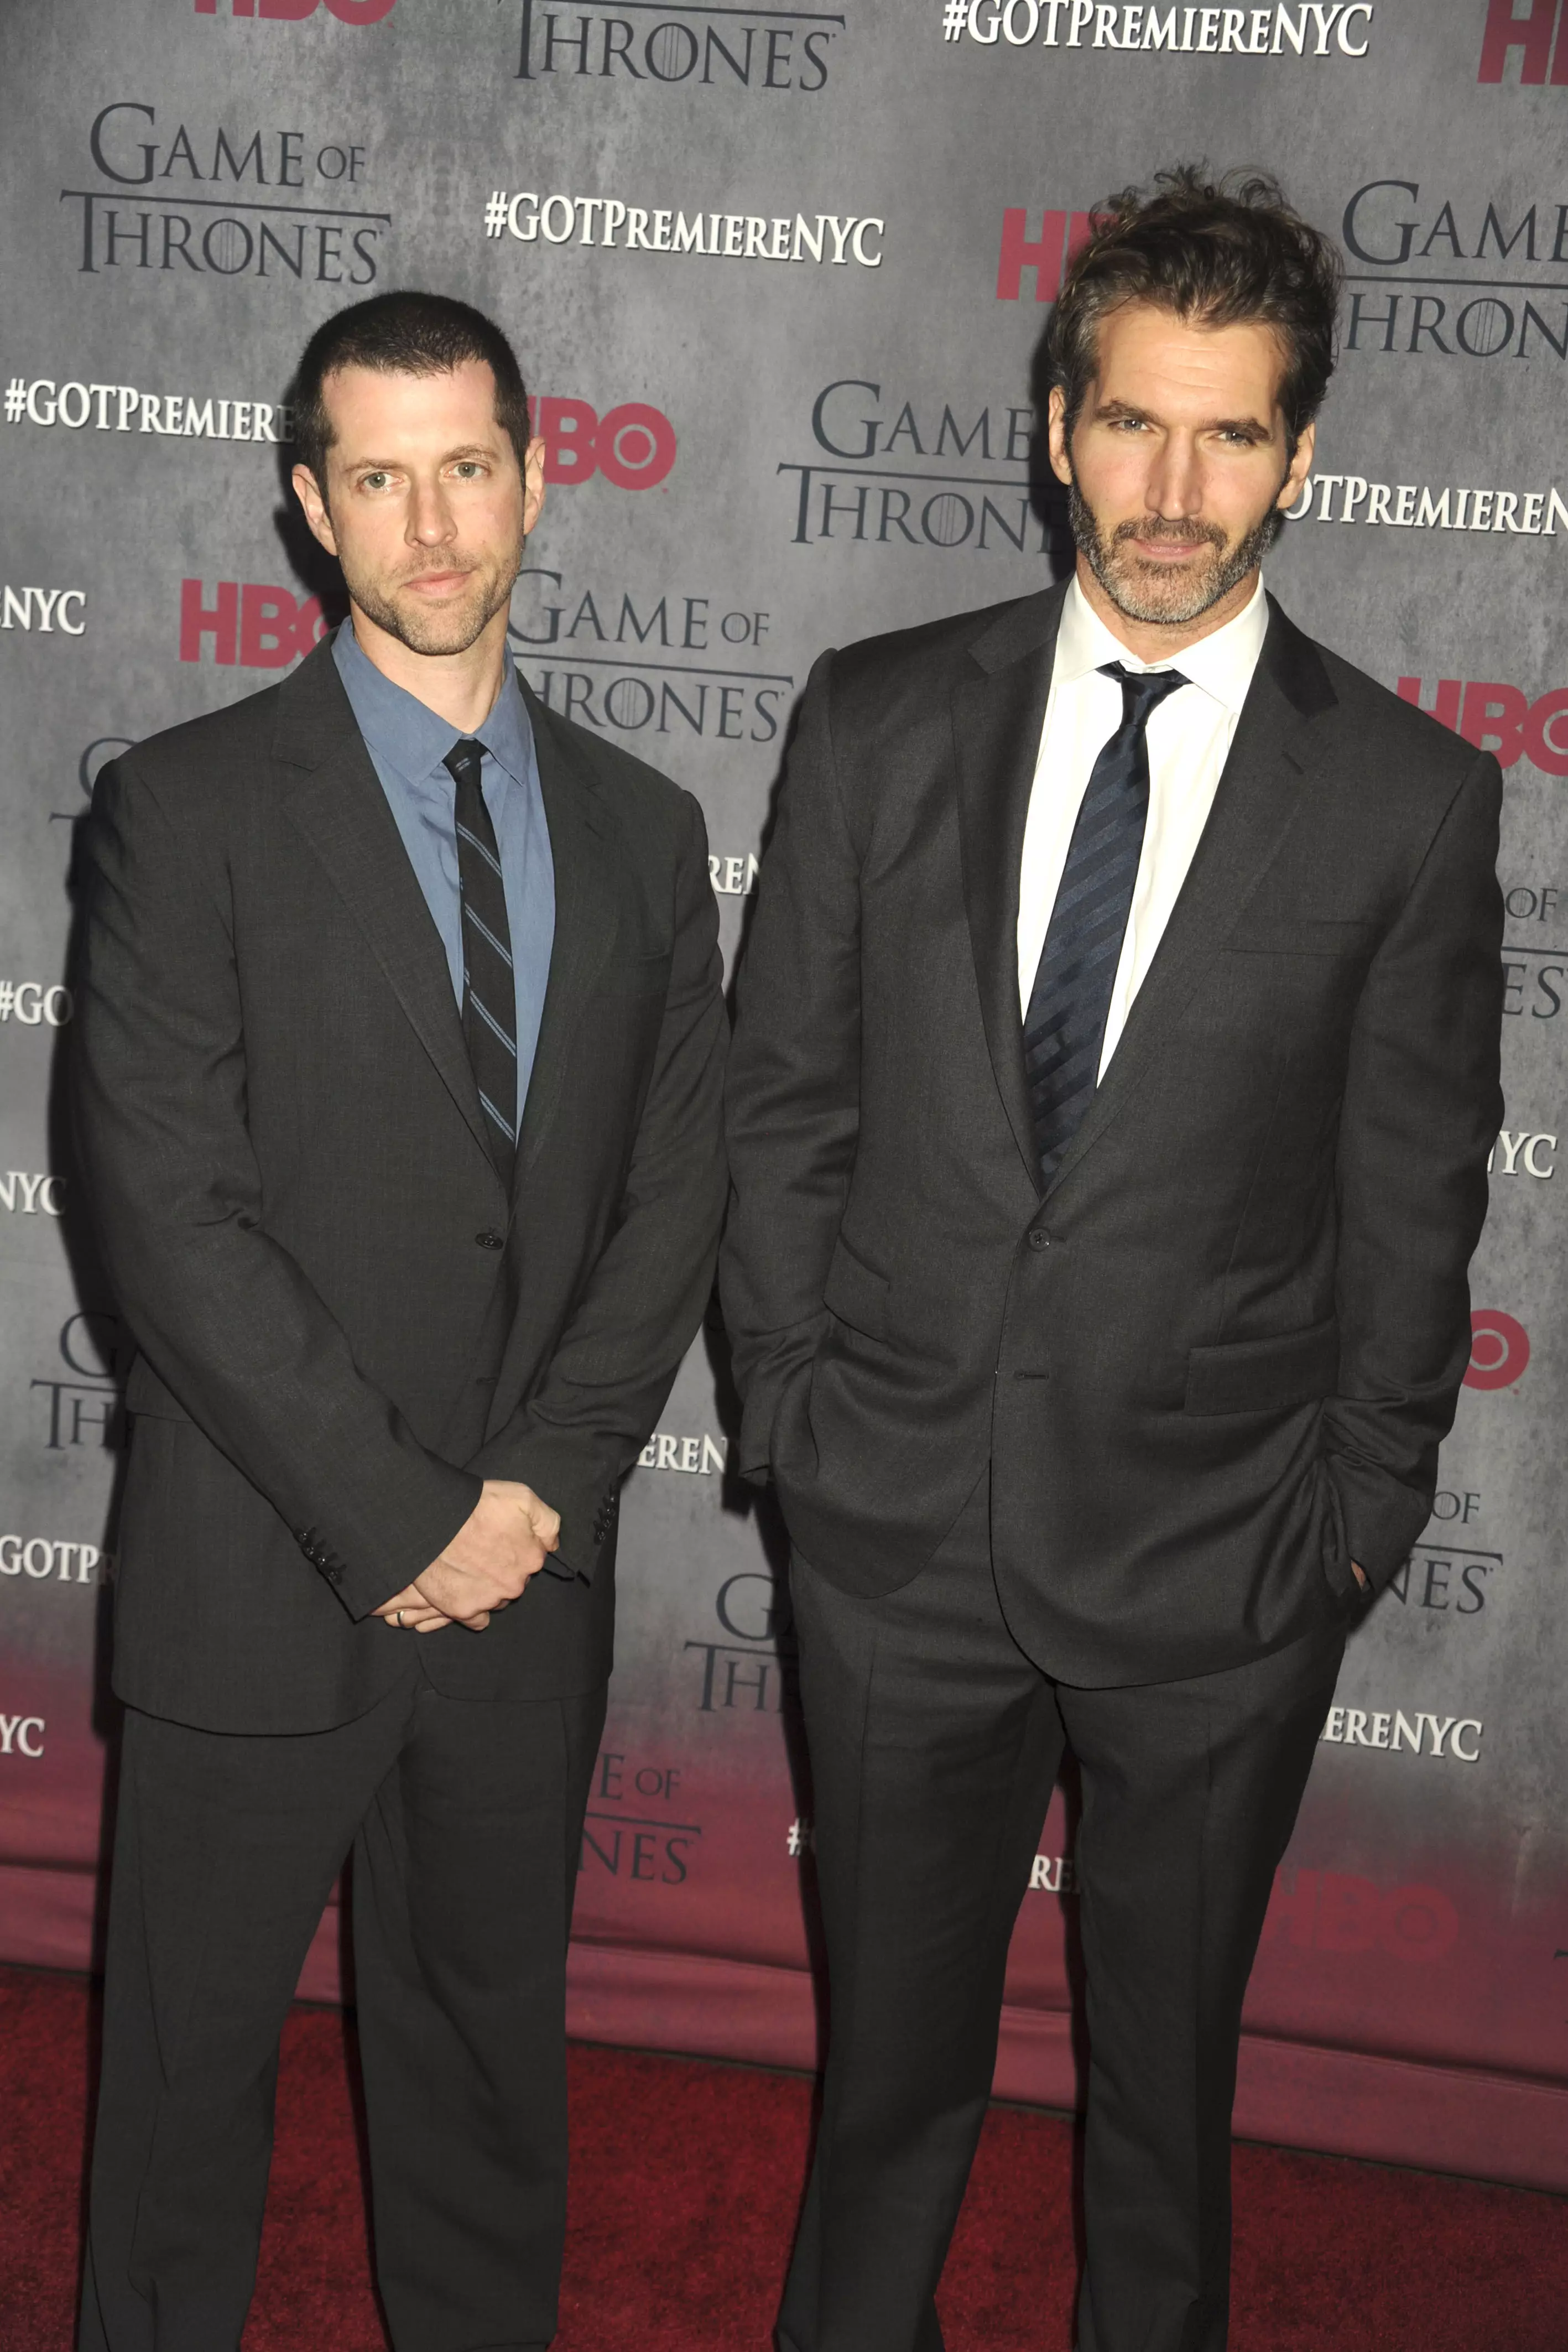 D.B Weiss and David Benioff co-created HBO hit series 'Game of Thrones' (